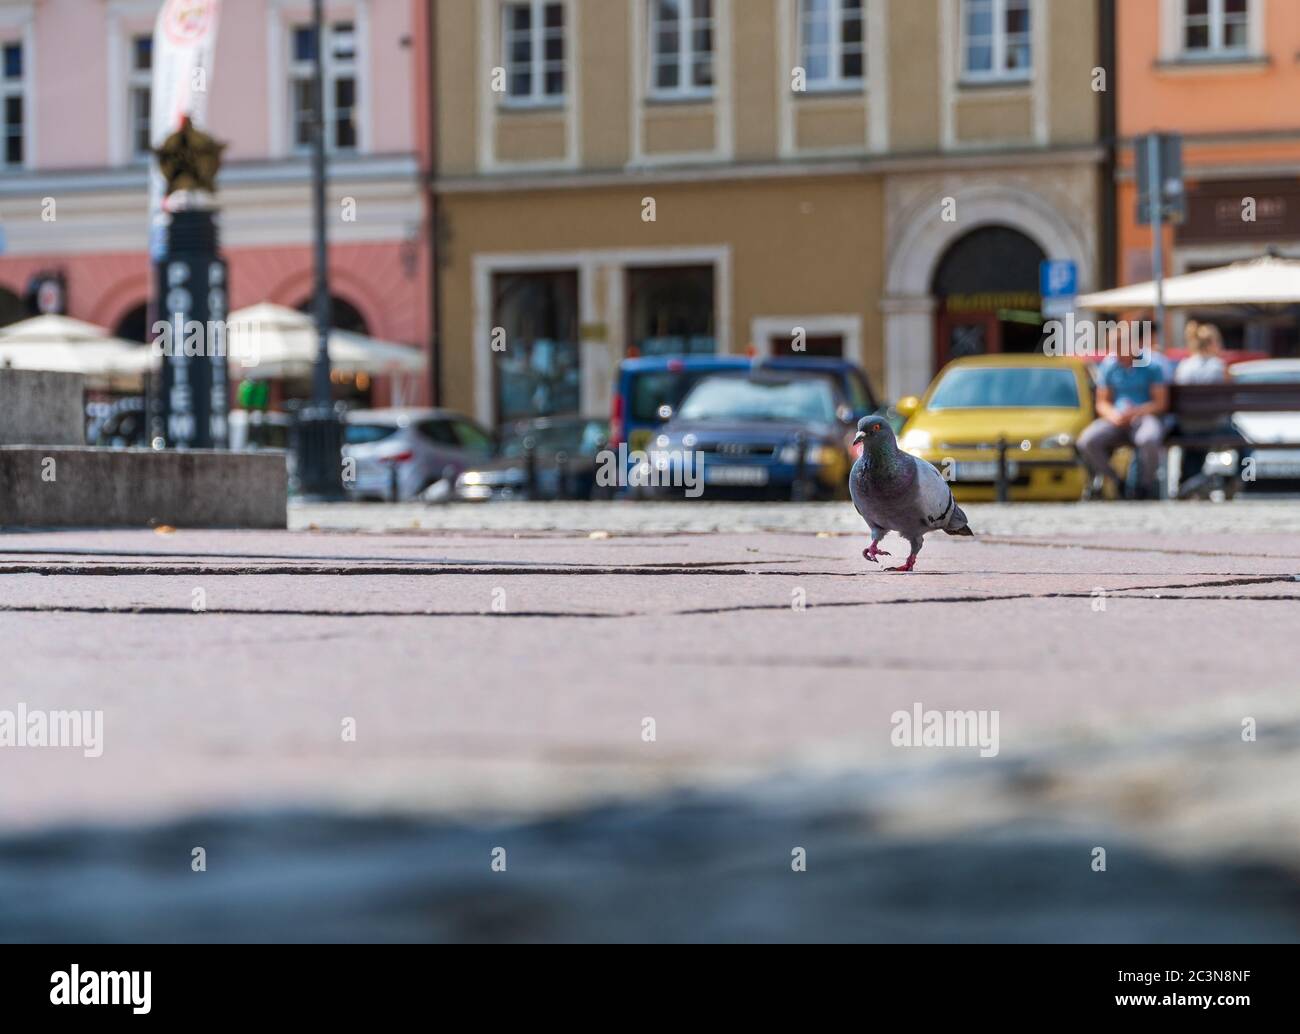 Wroclaw, Poland - August 16, 2019: A feral pigeon walking across the Plac Solny in the old town district. People sitting in the blurred background. Stock Photo